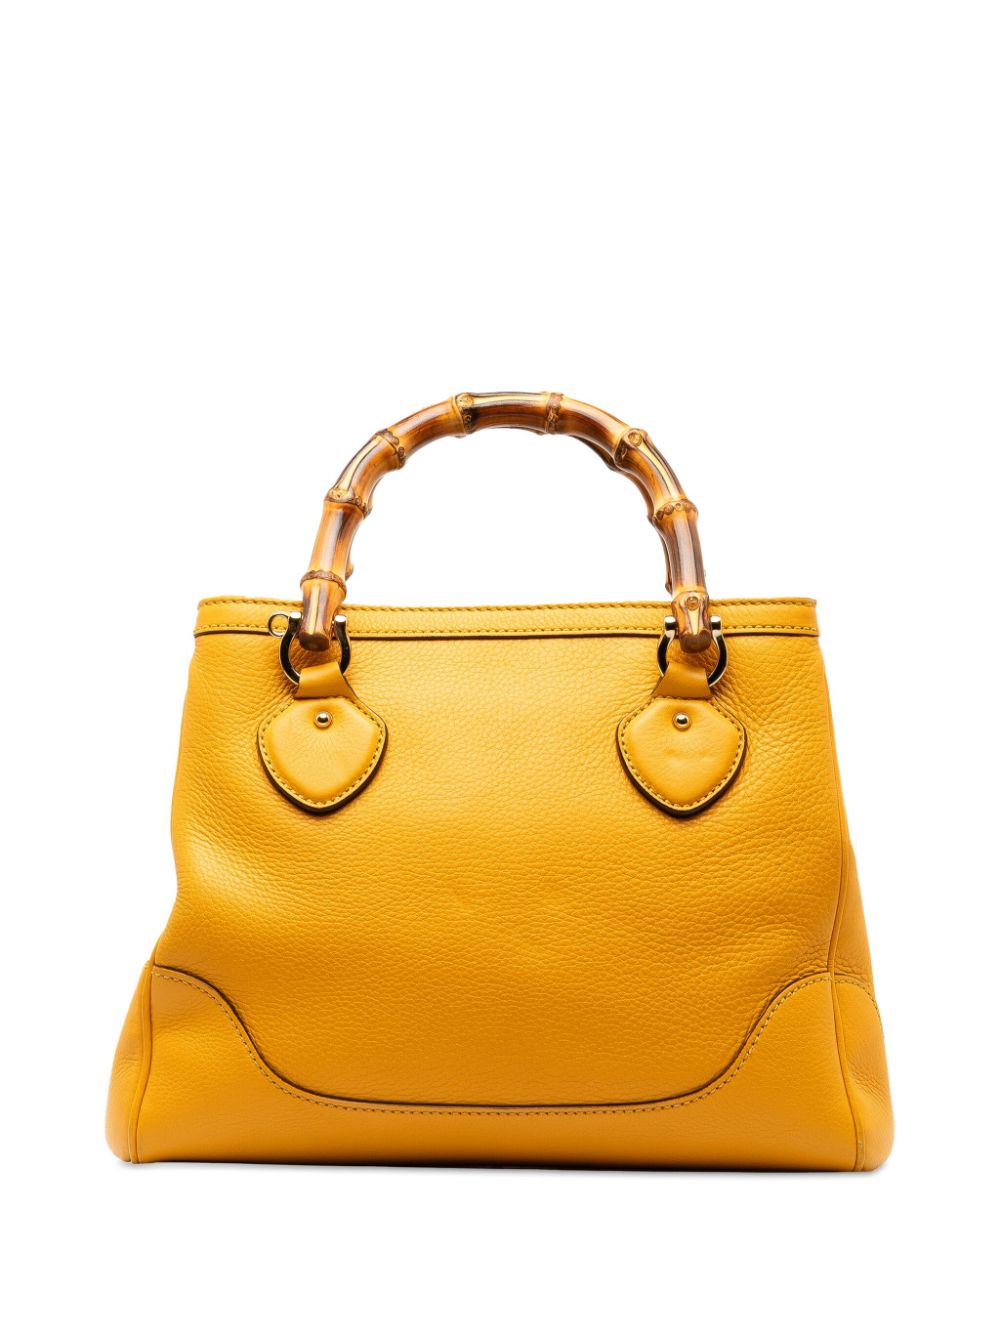 Pre-owned Gucci 2000-2015 Medium Bamboo Diana Satchel In Yellow